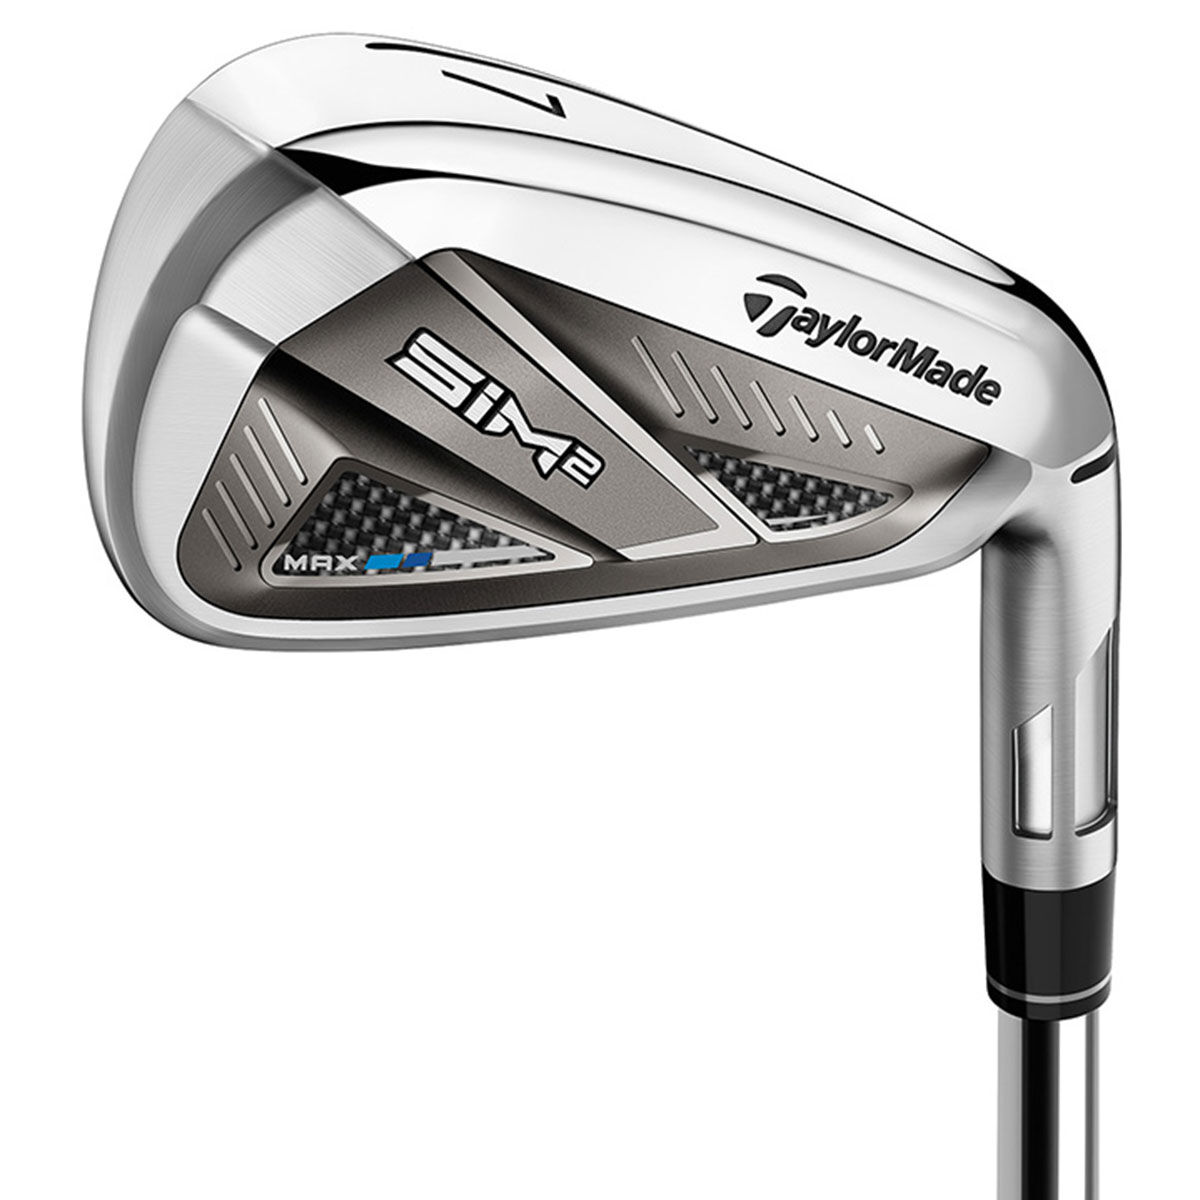 TaylorMade Golf Irons, Womens SIM2 MAX Graphite, Female, 6-sw (6 irons), Right hand, Graphite, Lady flex | American Golf